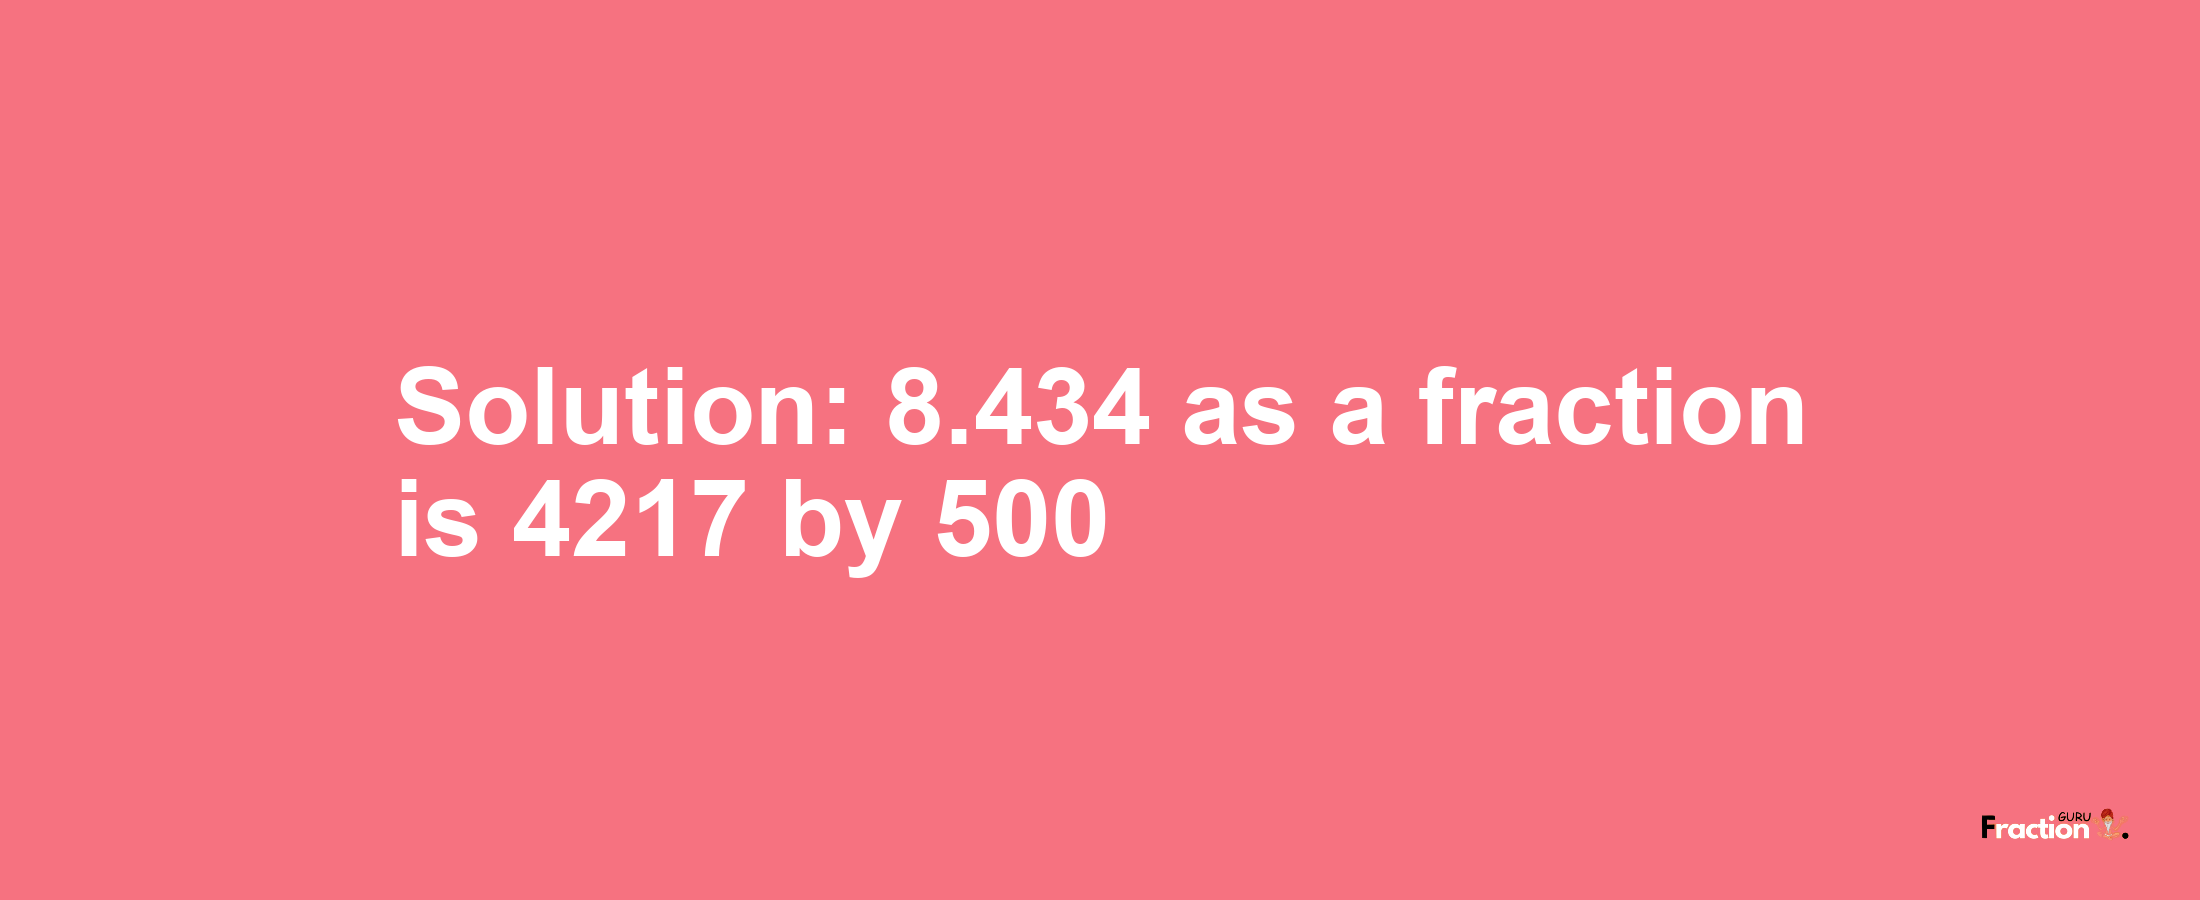 Solution:8.434 as a fraction is 4217/500